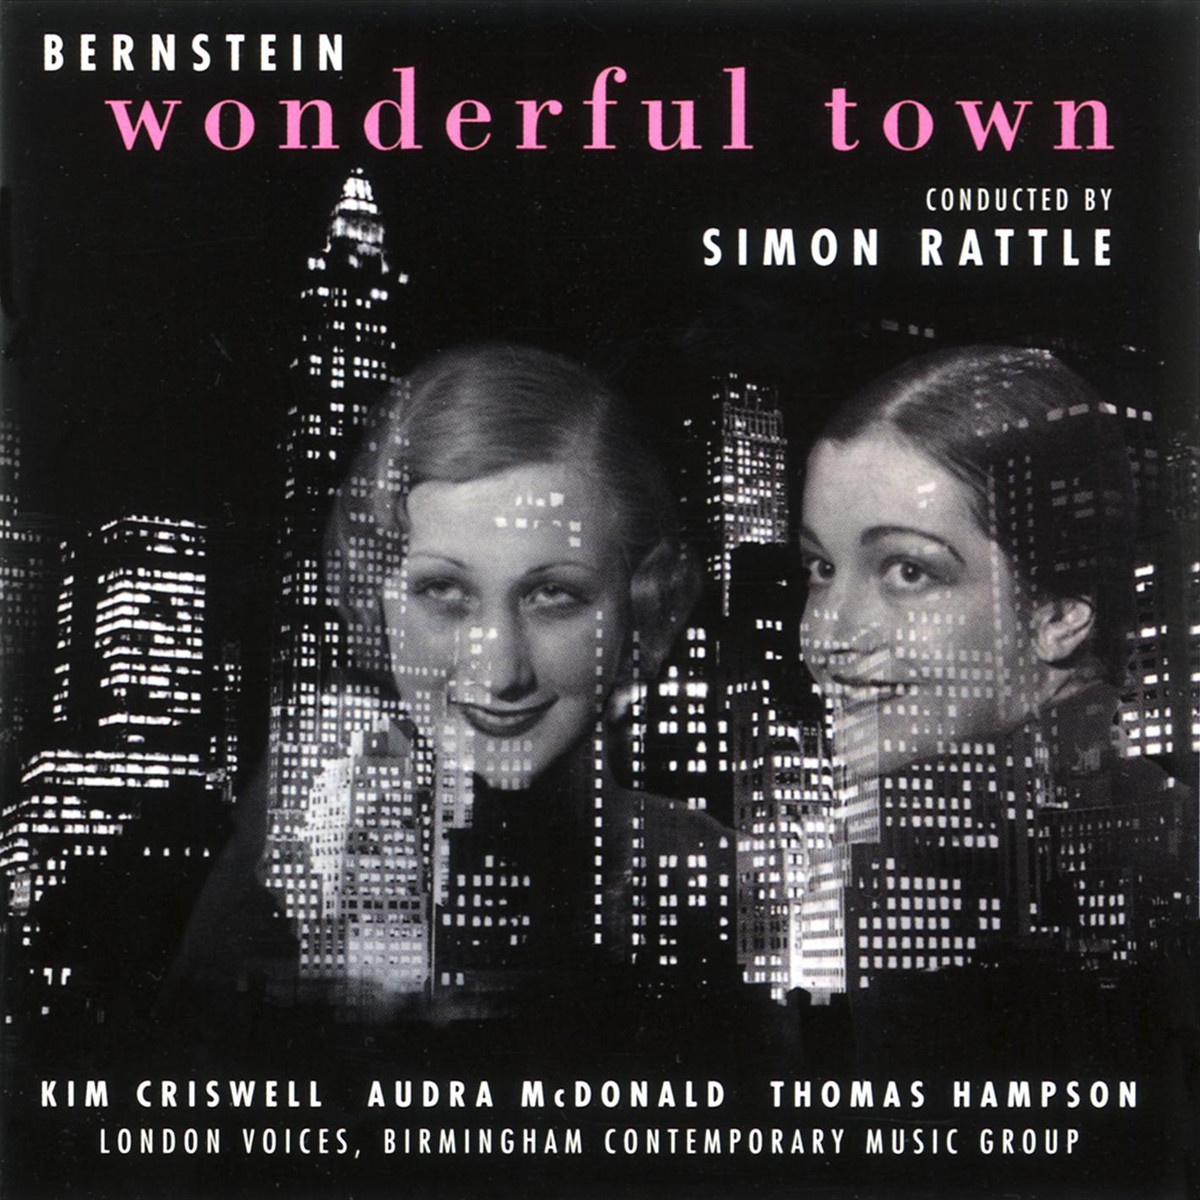 Wonderful Town: It's Love Reprise - Finale Act Two (Eileen/Baker/Ruth/Chorus)